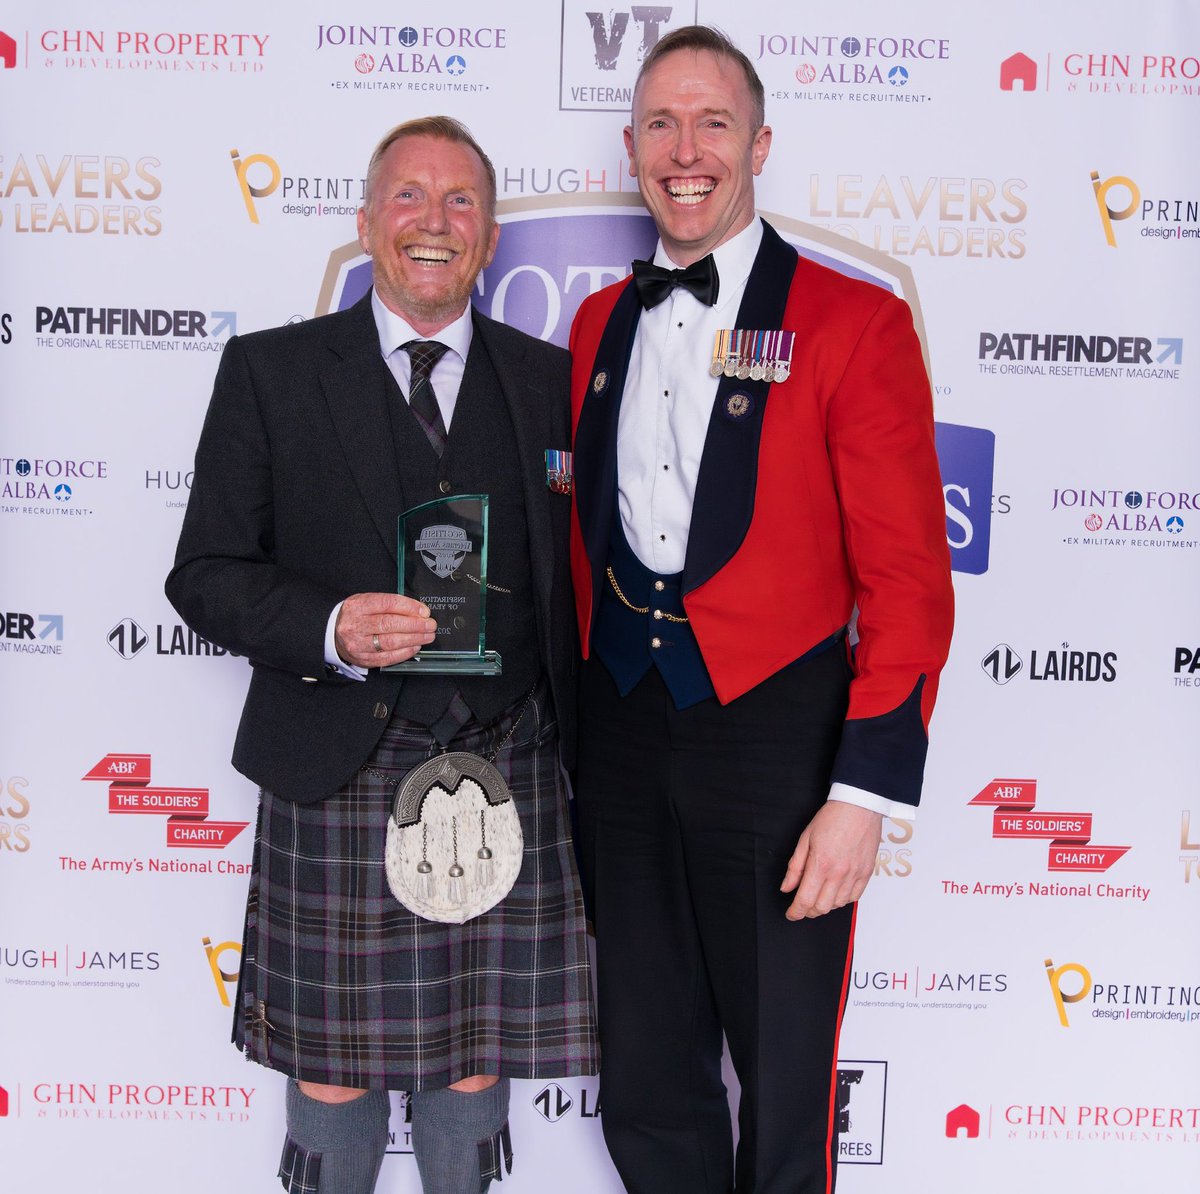 At the Scottish @AwardsVeterans this week it was a real pleasure to meet and hear the story of Inspiration of the winner, Dougie Morgan from @fightingwpride I truly do wish I had met him long ago, I wish you every success. 

#veterans #veteransawards #military